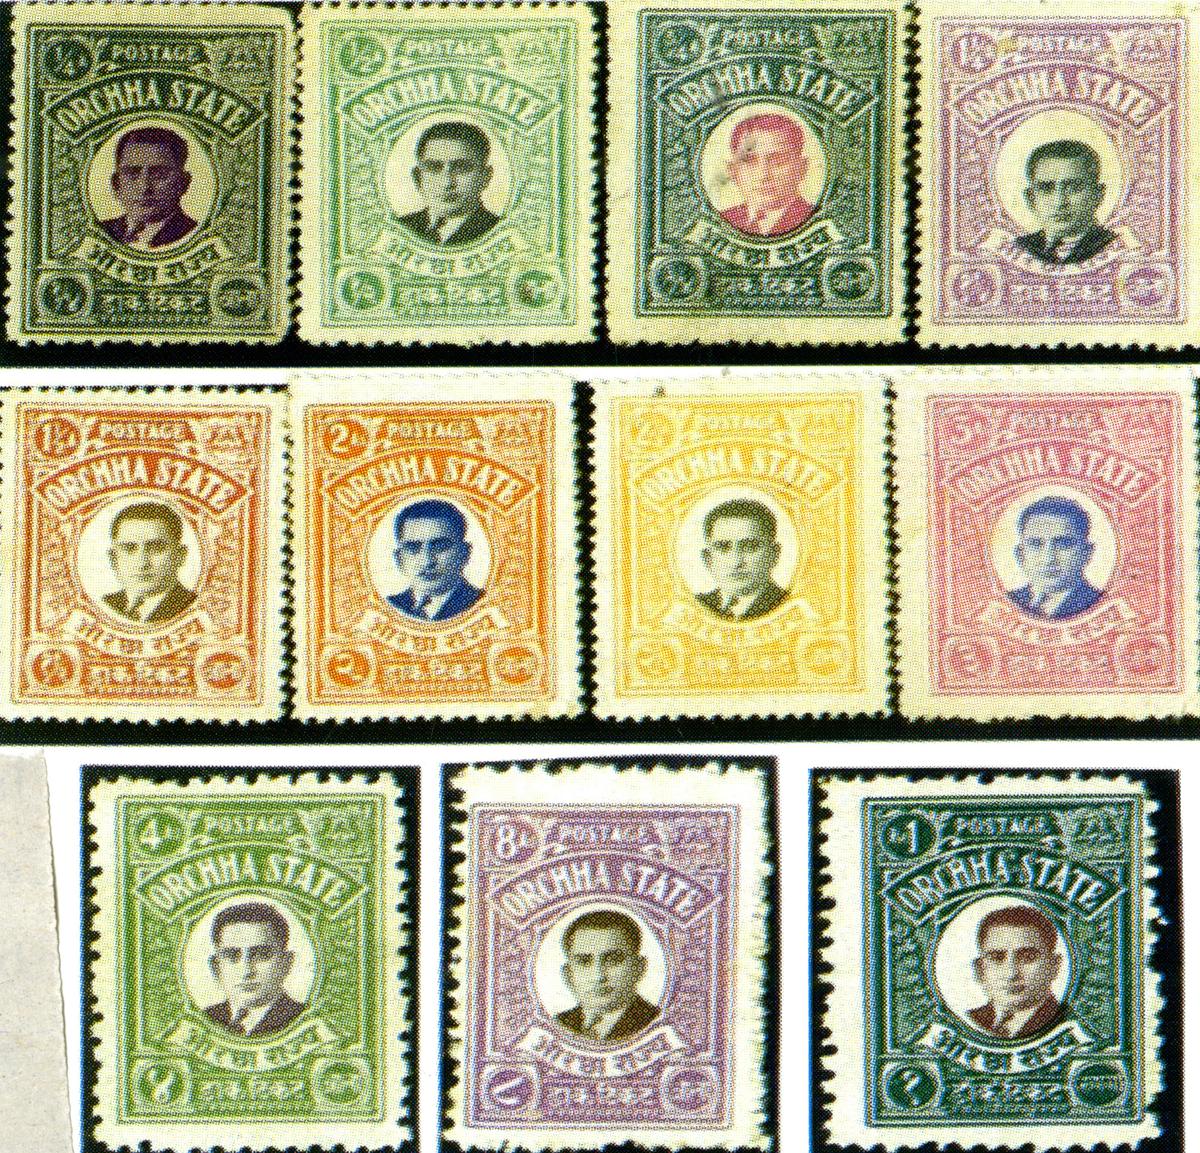 Where can we buy stamps in India? - Buy Indian Stamps - Philacy